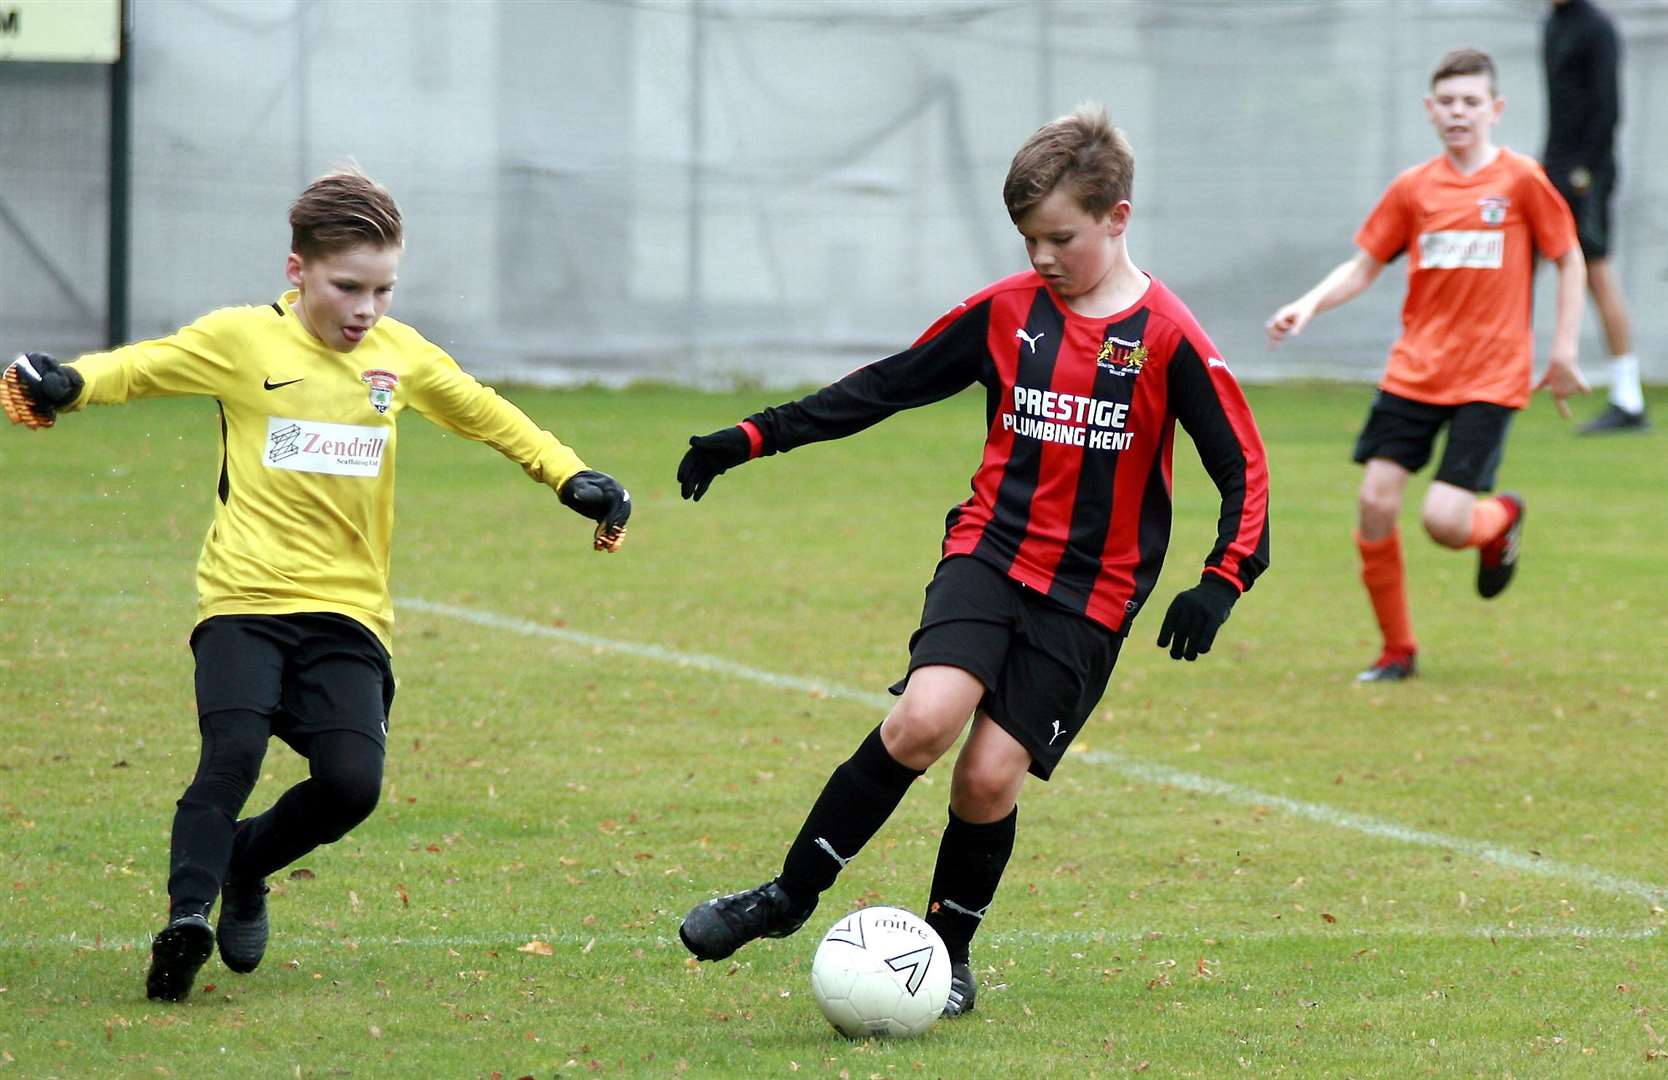 The Lordswood Youth under-11s goalkeeper under pressure against Woodcoombe Youth under-11s Picture: Phil Lee